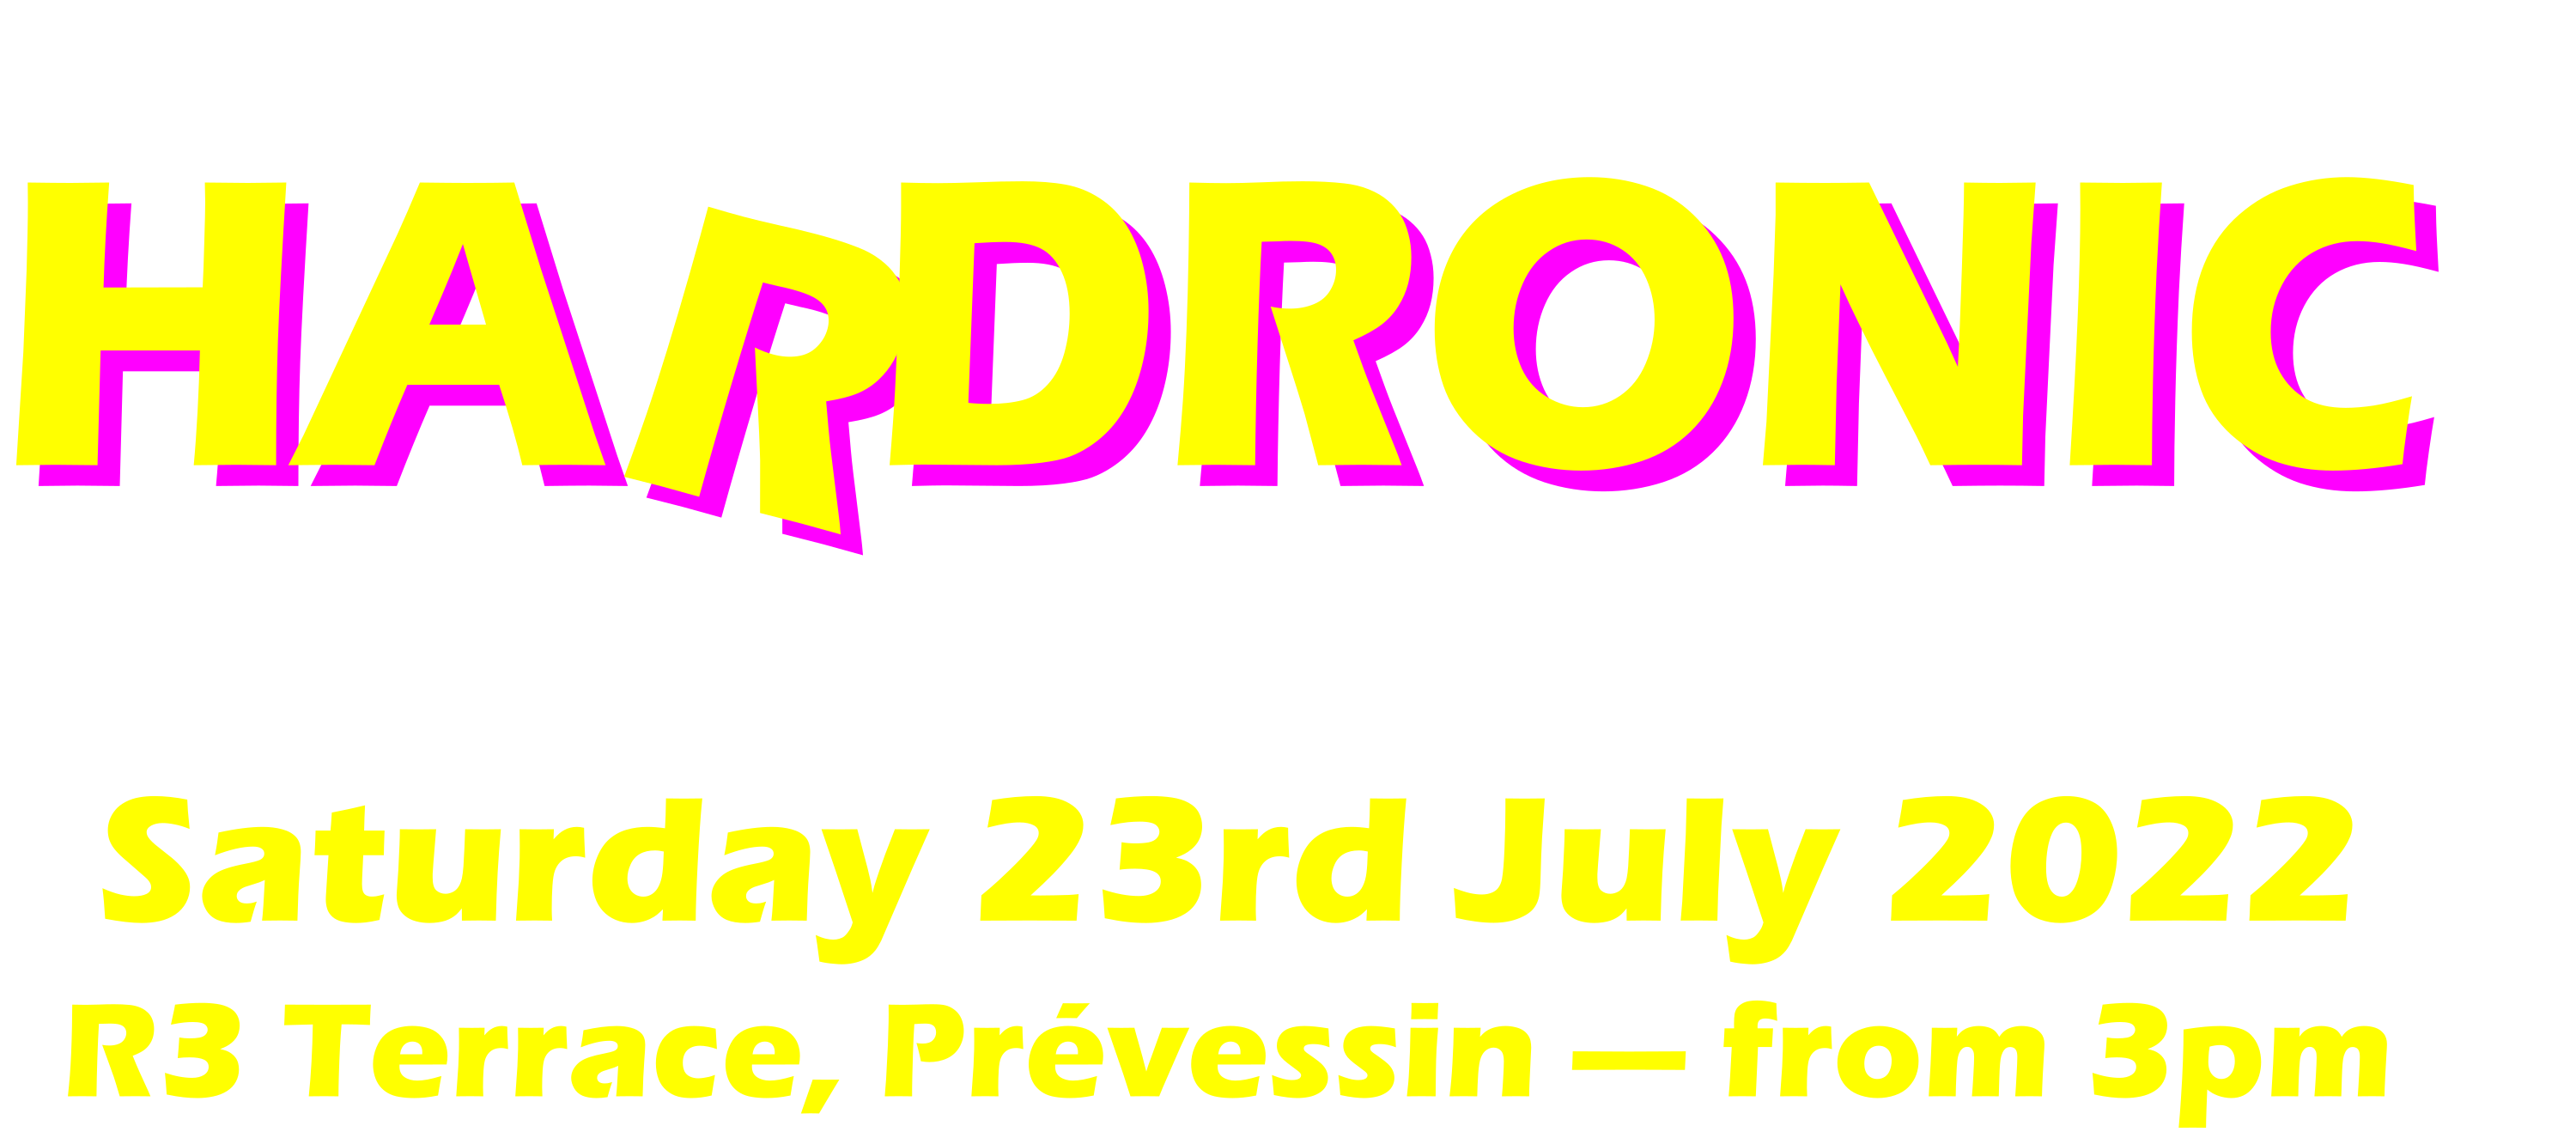 CERN MusiClub Presents... Hardronic Music Festival vol.2022. Saturday 23rd July 2022. R3 Terrace Prévessin - from 3pm.